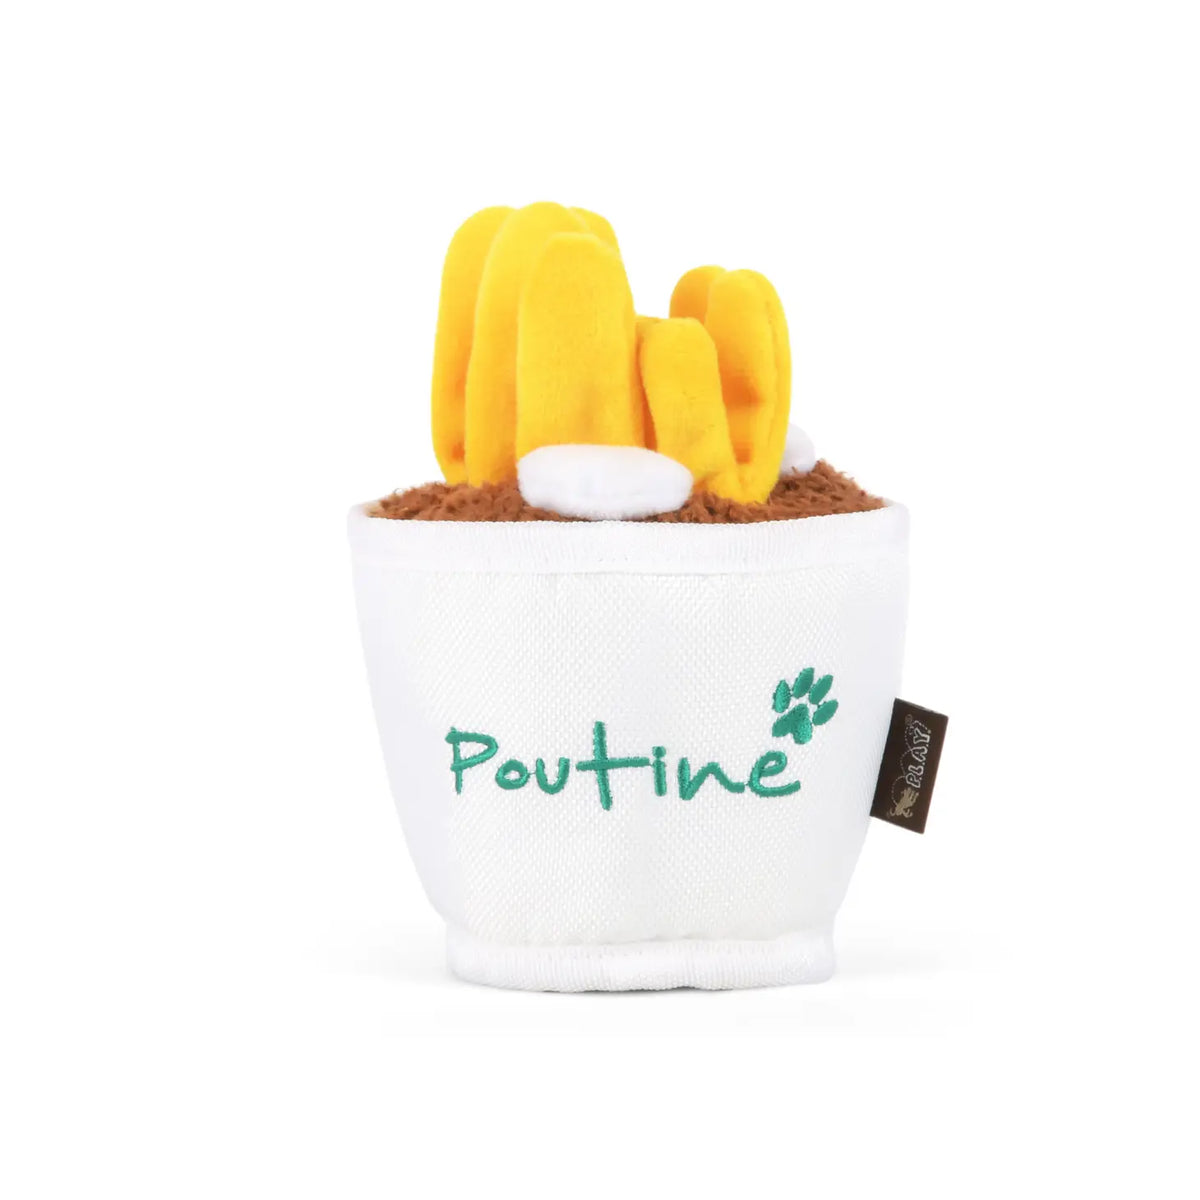 P.L.A.Y. - Poutine Fries In Cup Of Gravy - Earth Rated